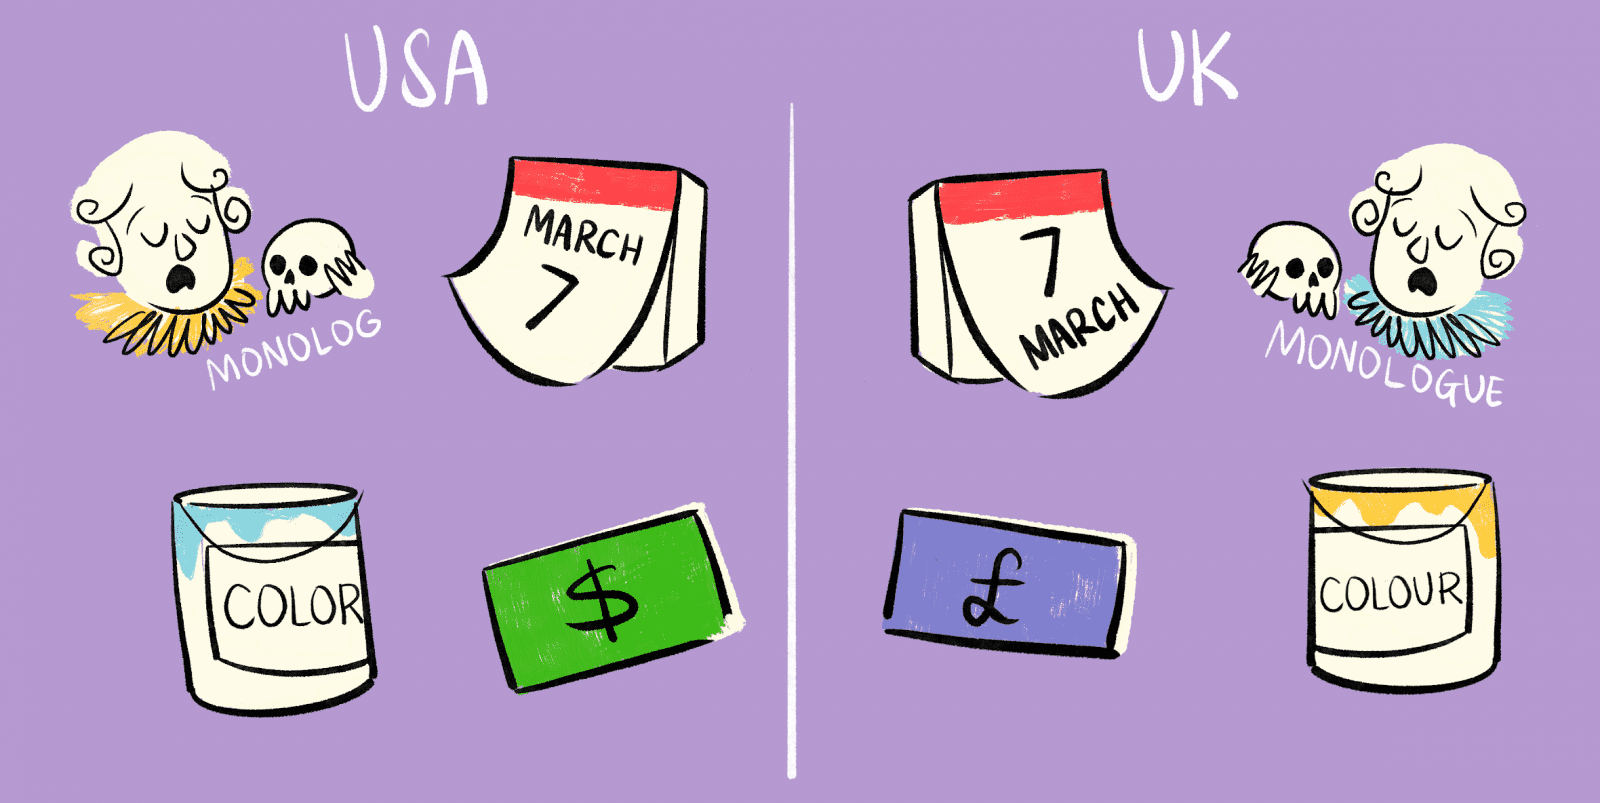 Image shows the discrepancies between American English and British English. For example, colour is spelled without the U in the USA. Also, the month comes before the day when writing a date, whereas it’s the opposite in British English.